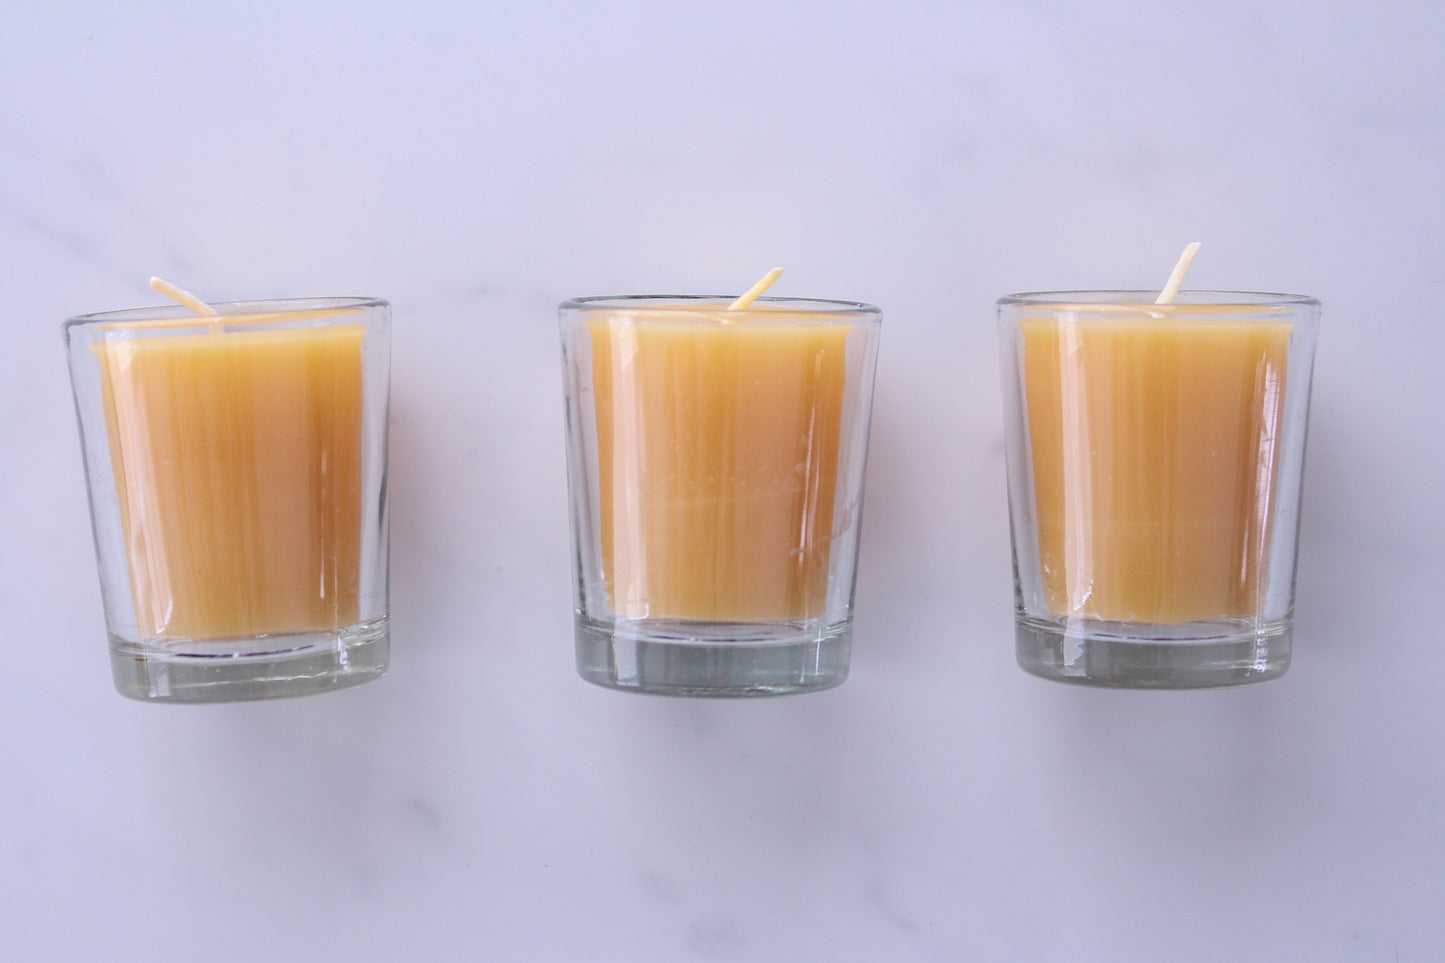 3 beeswax votive candles in glass votive holders